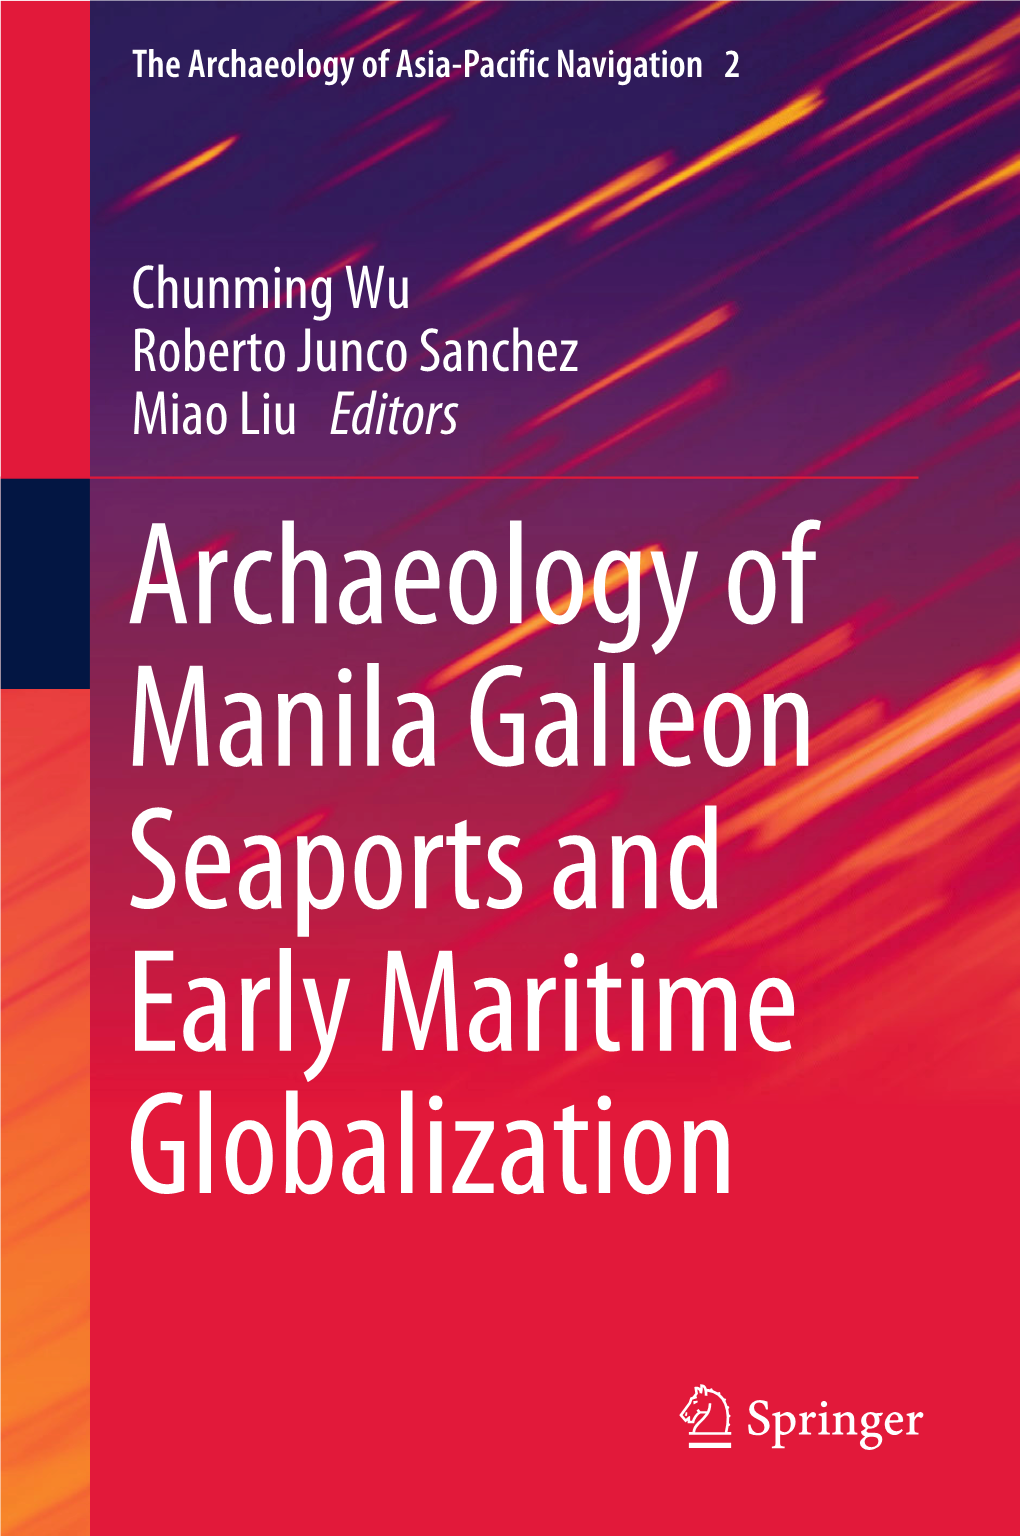 Archaeology of Manila Galleon Seaports and Early Maritime Globalization the Archaeology of Asia-Paciﬁc Navigation